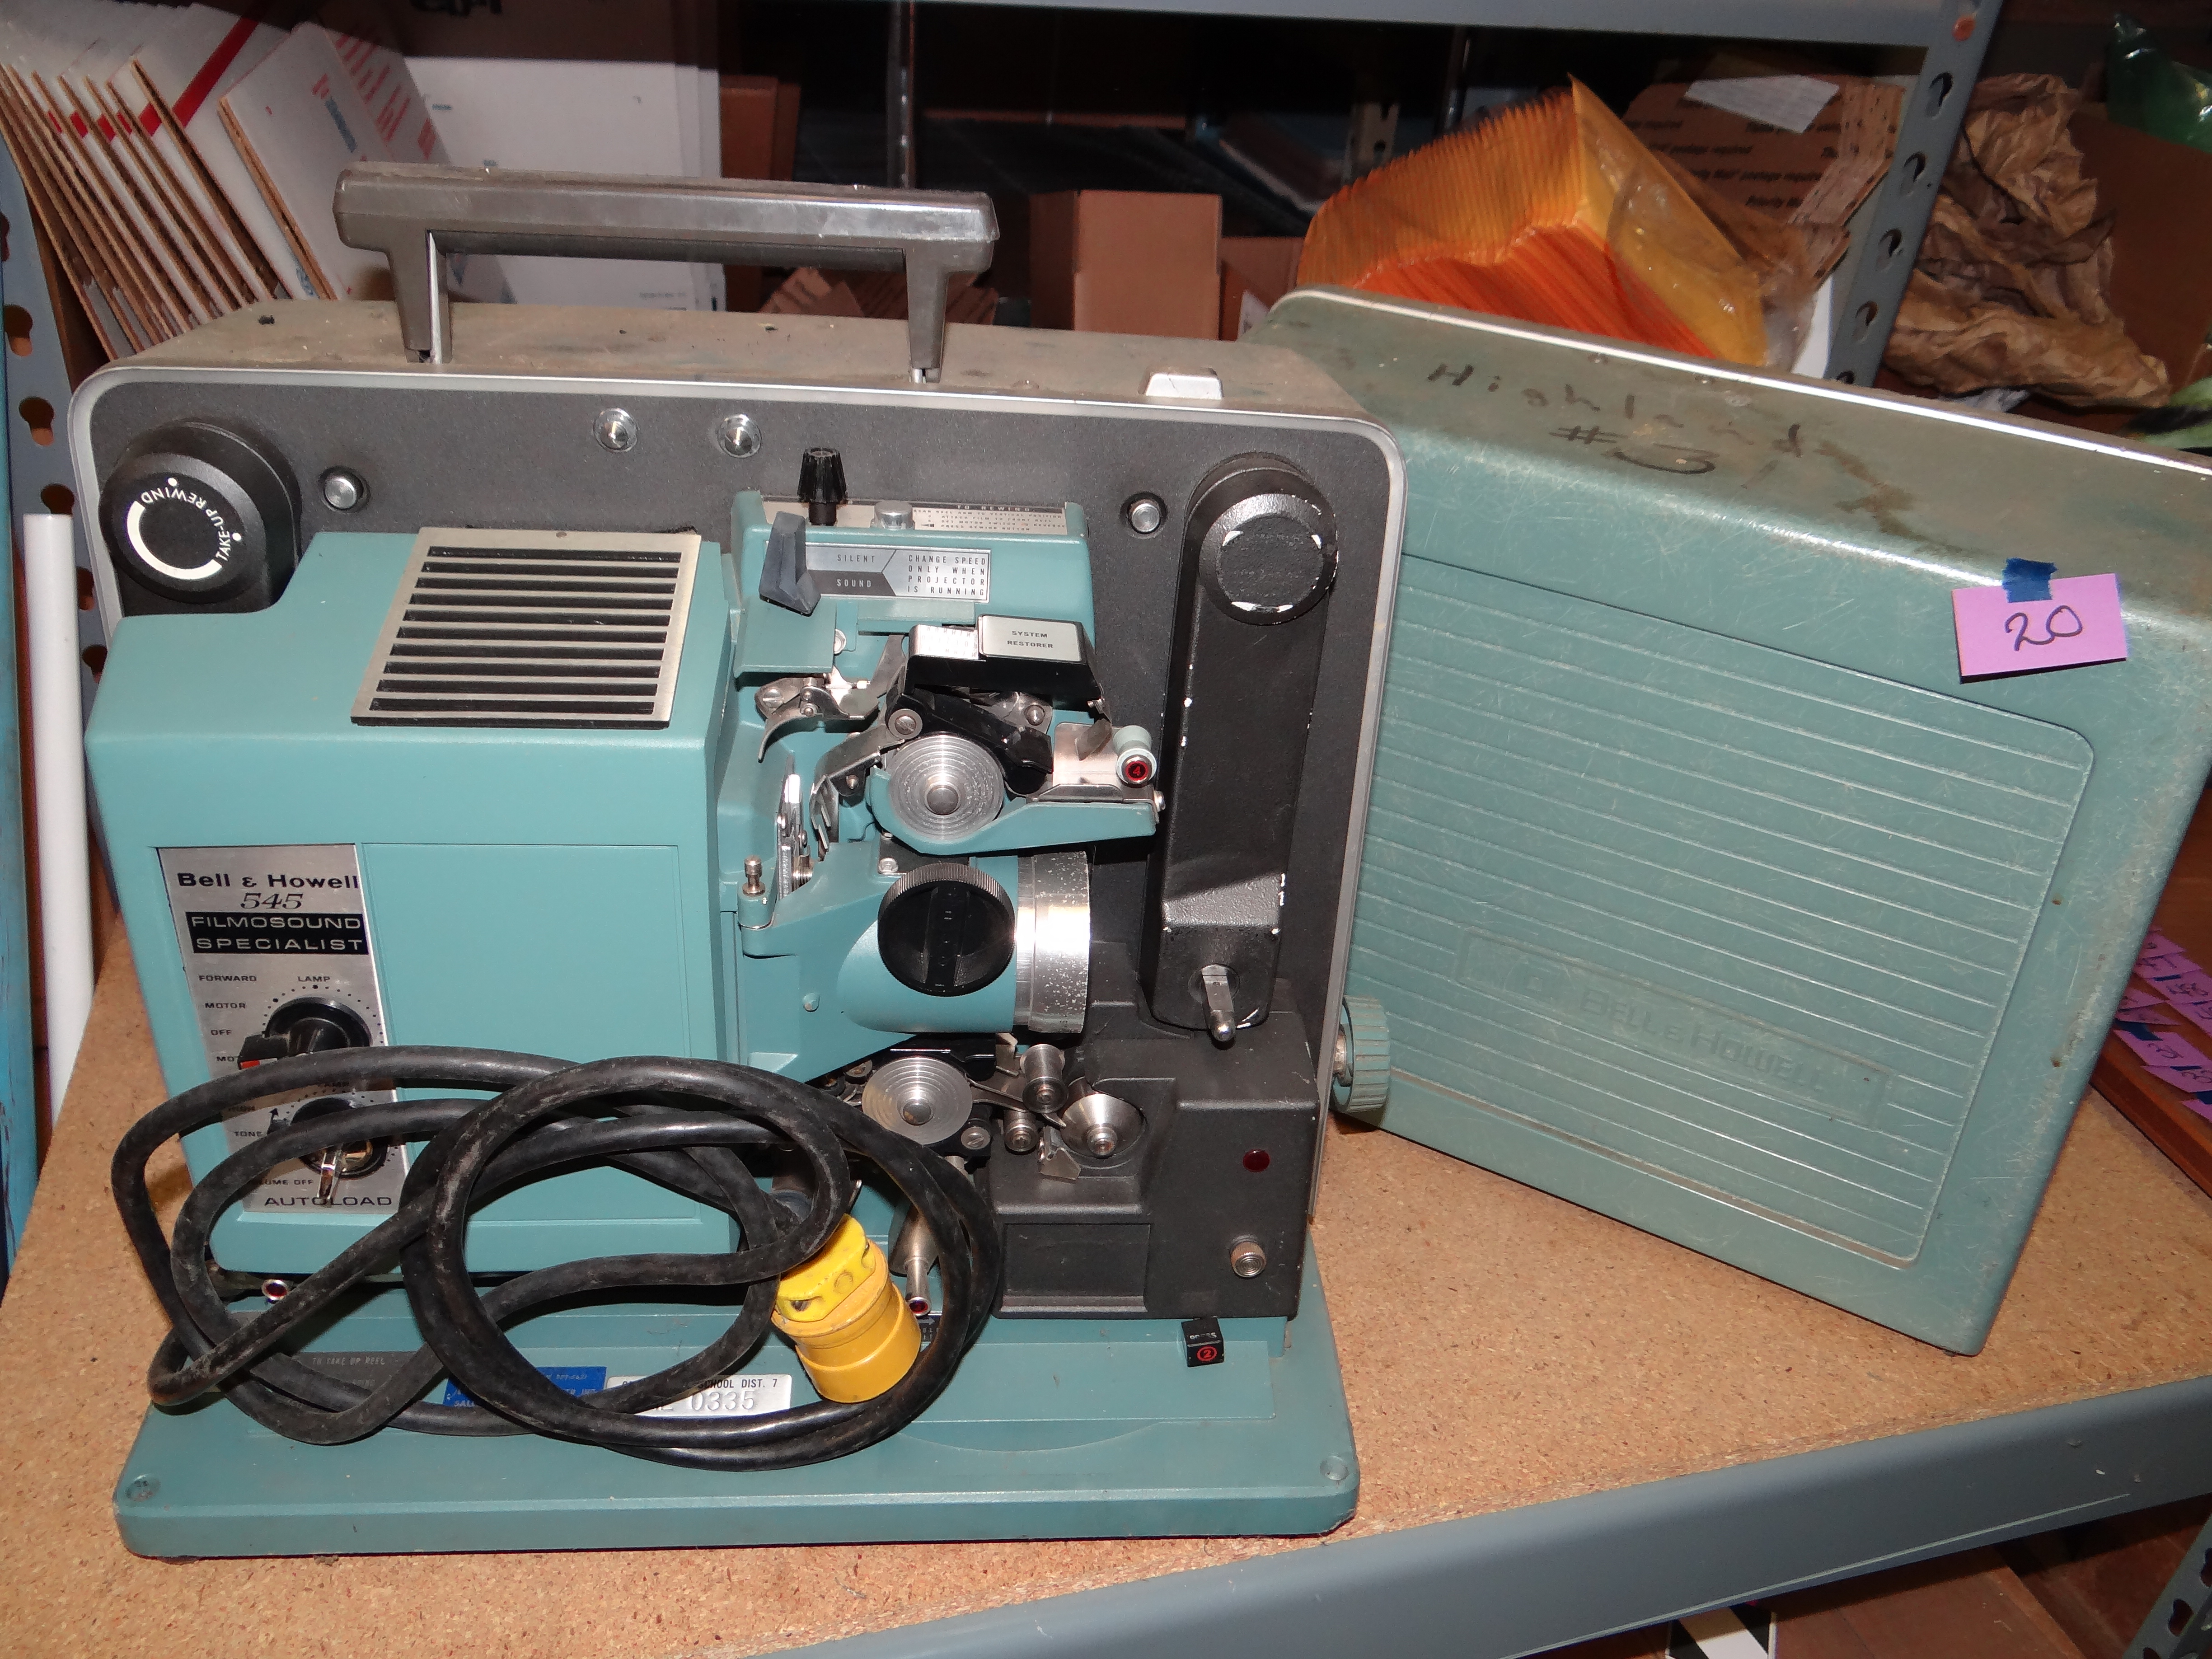 20-Bell & Howell 545 Projector in Case